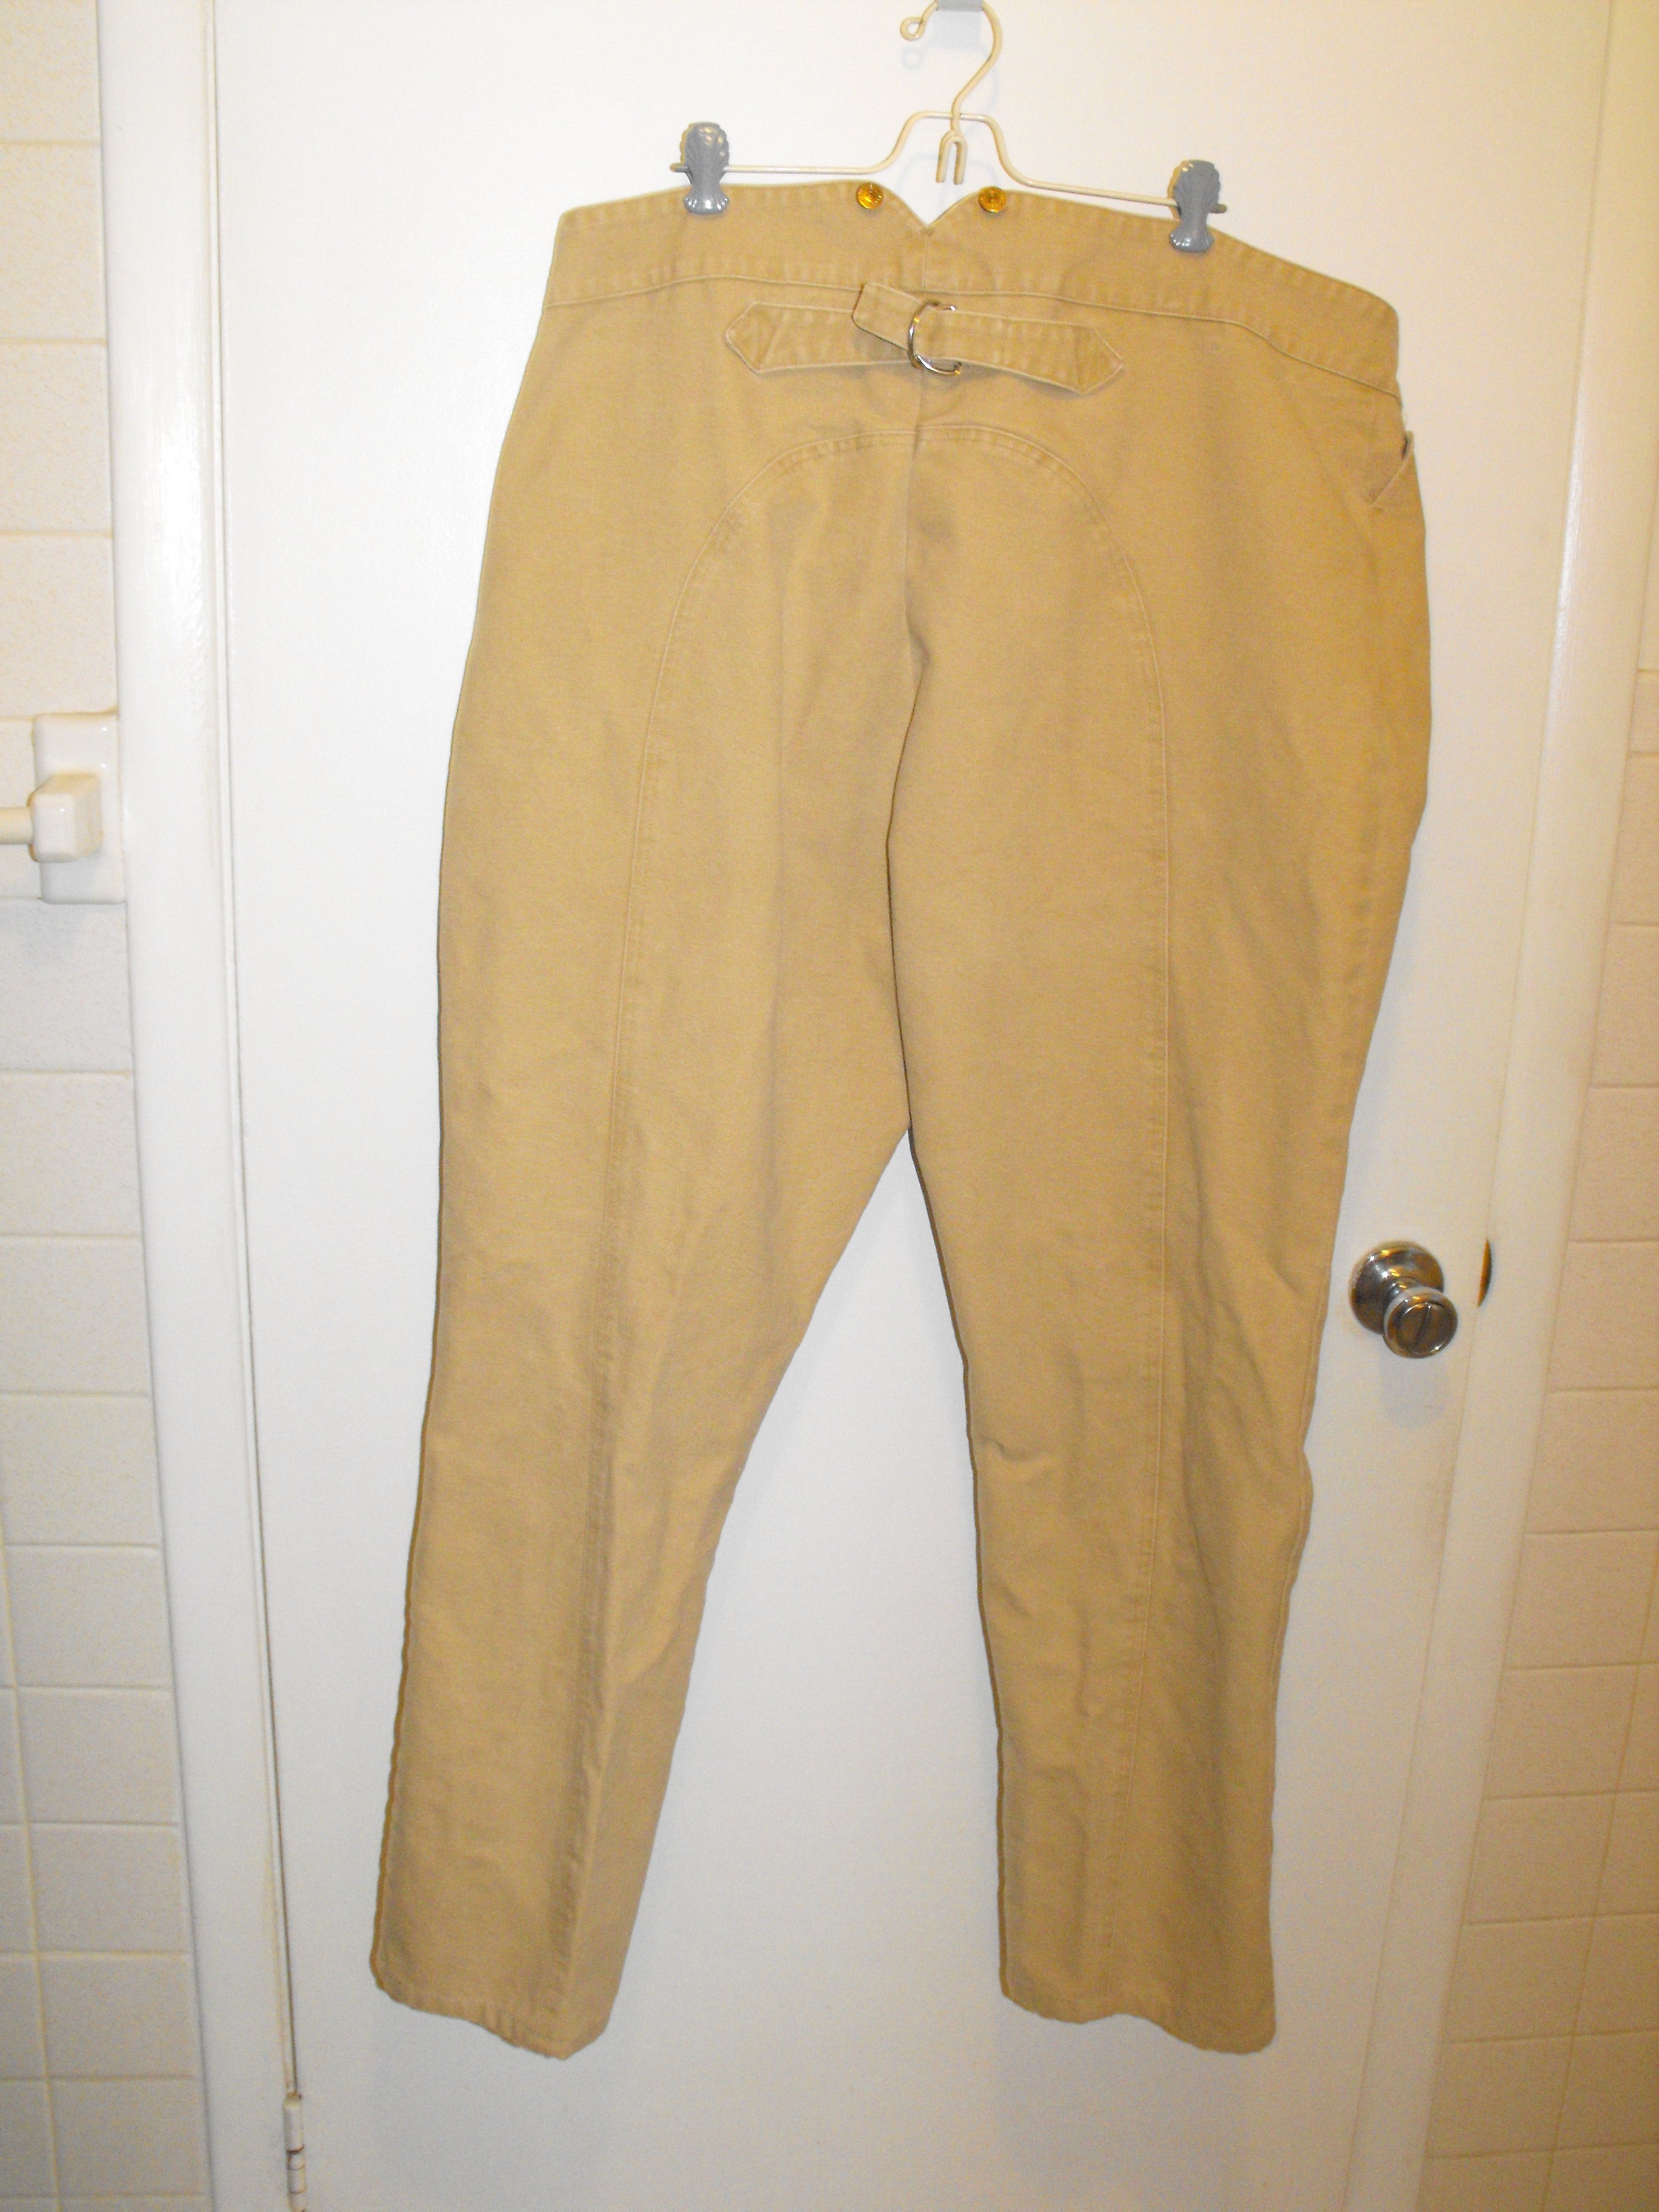 Pair of Men's Trousers - SASS Wire Classifieds - SASS Wire Forum